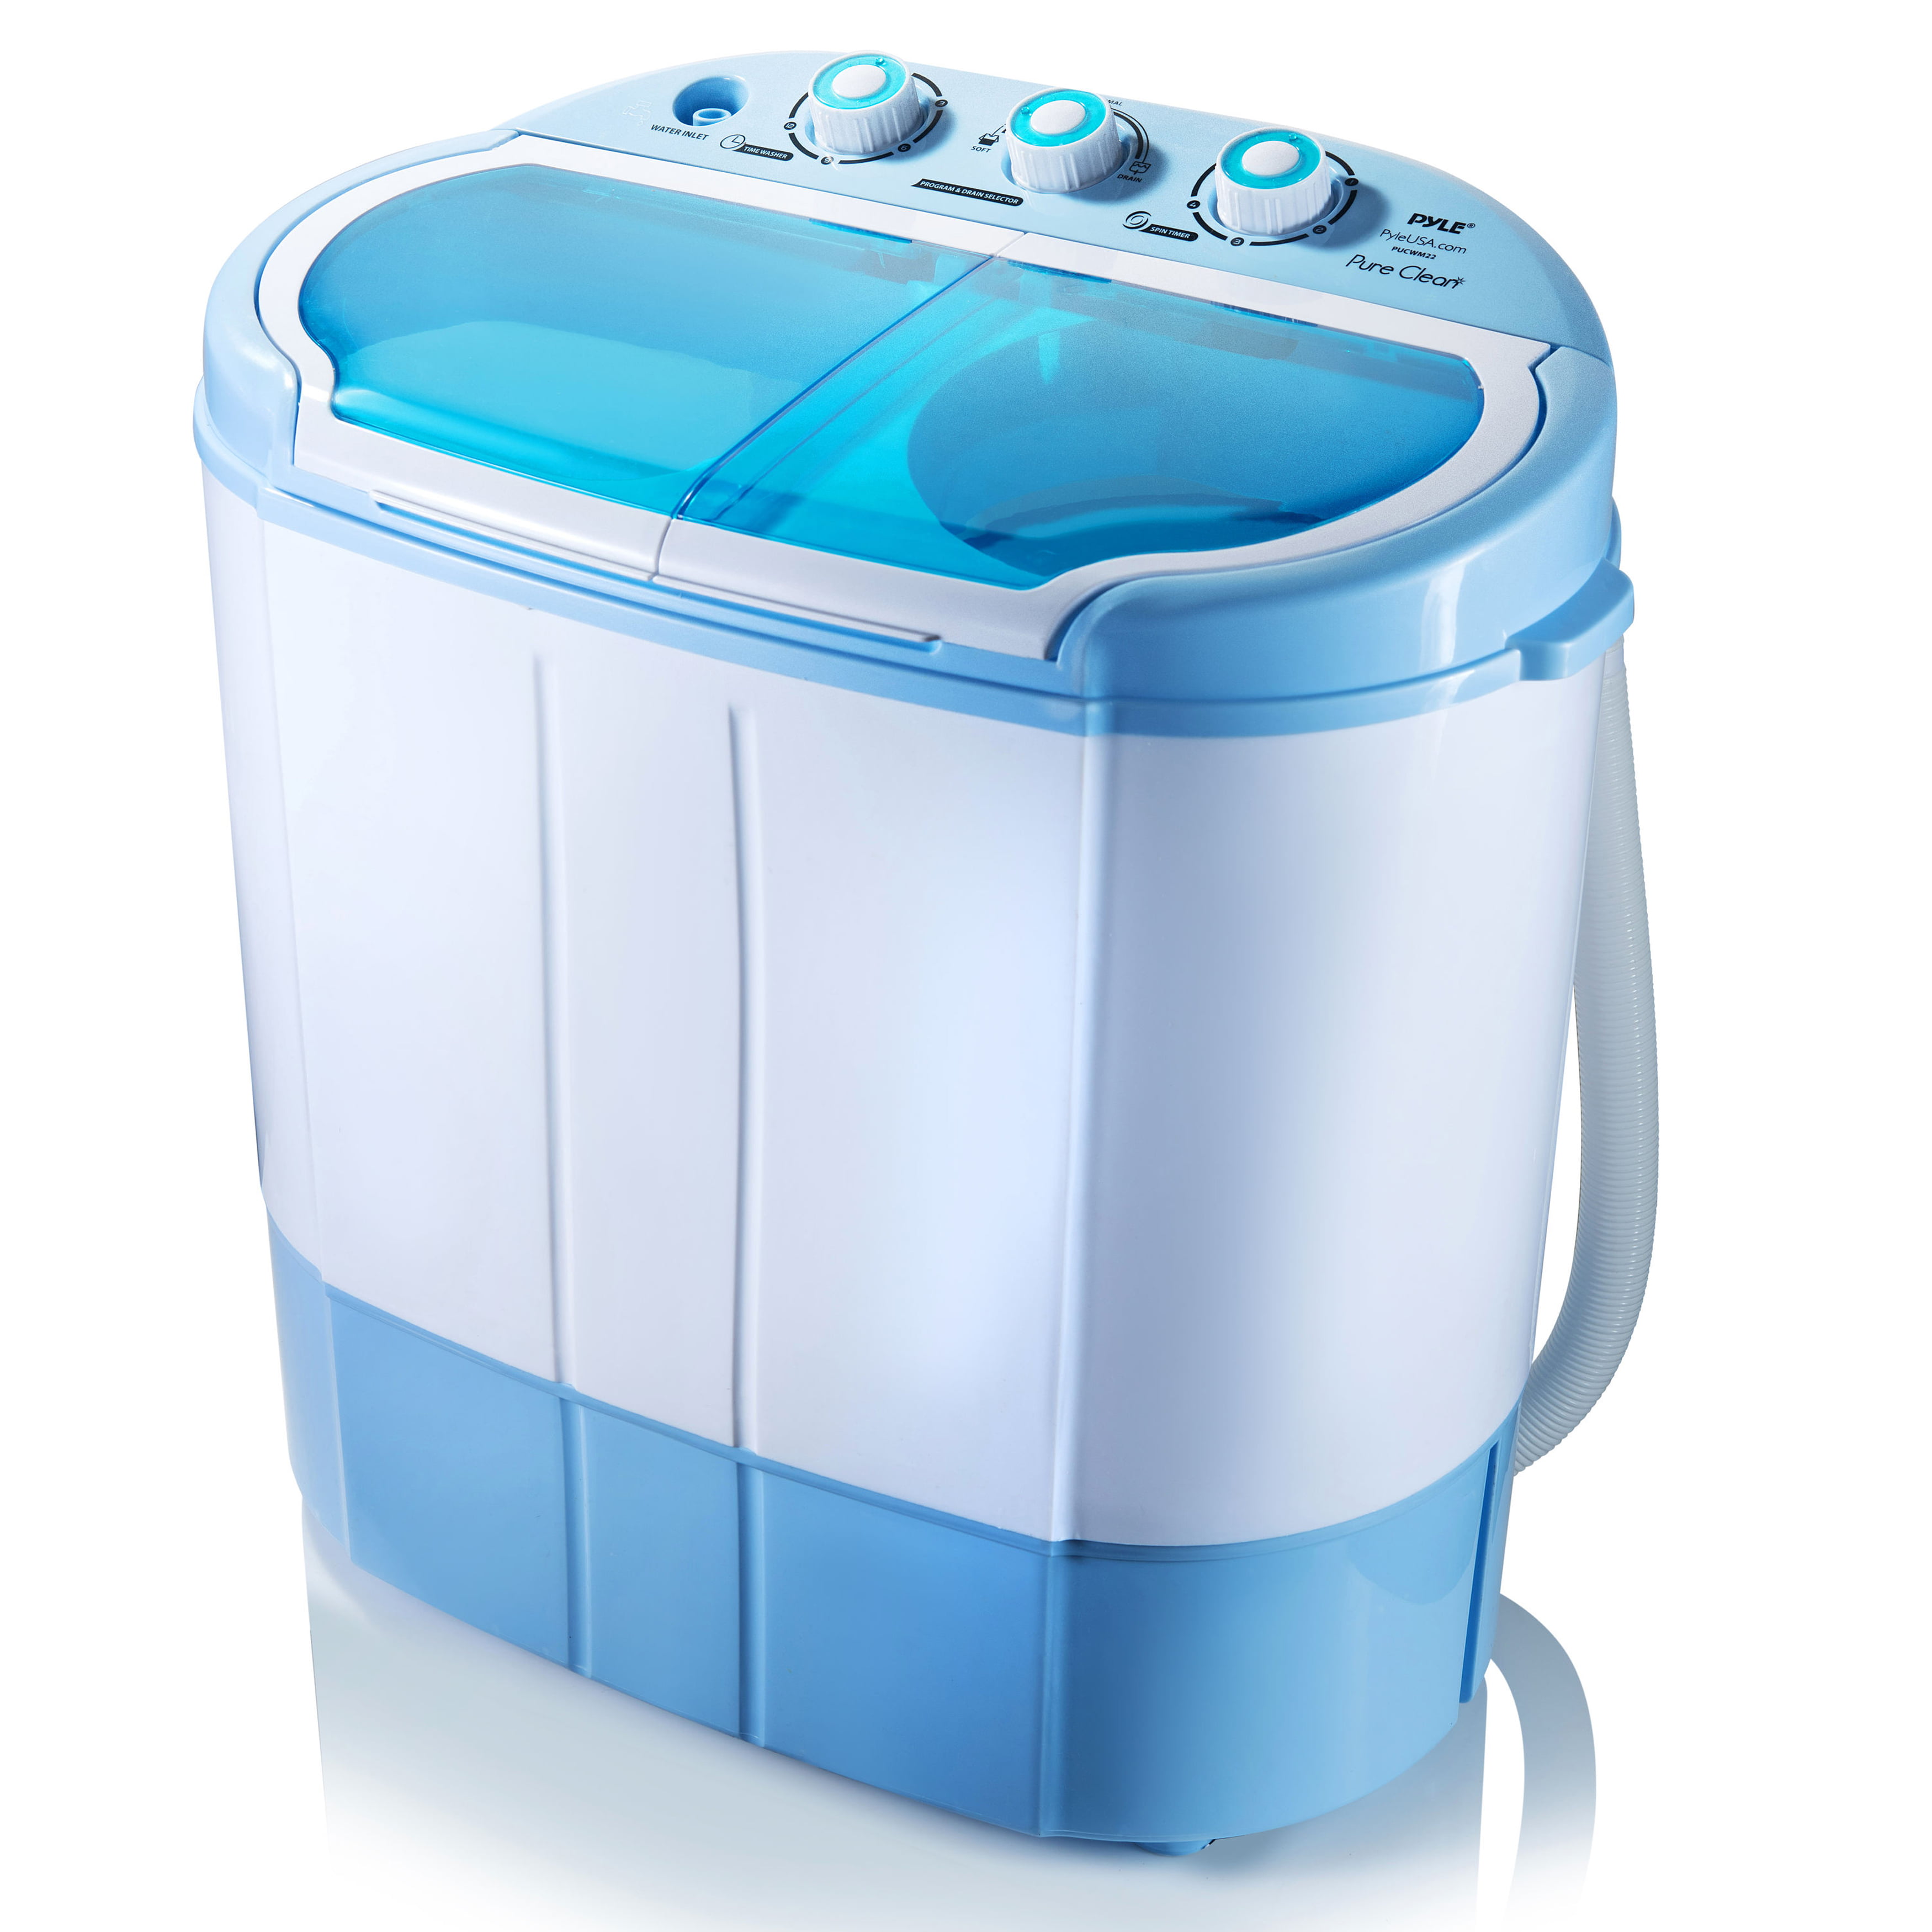 Mini Portable Washing Machine for Compact Space Small Semi-Automatic Compact Washer with Timer Control Single Translucent Tub 7.7lbs Capacity 